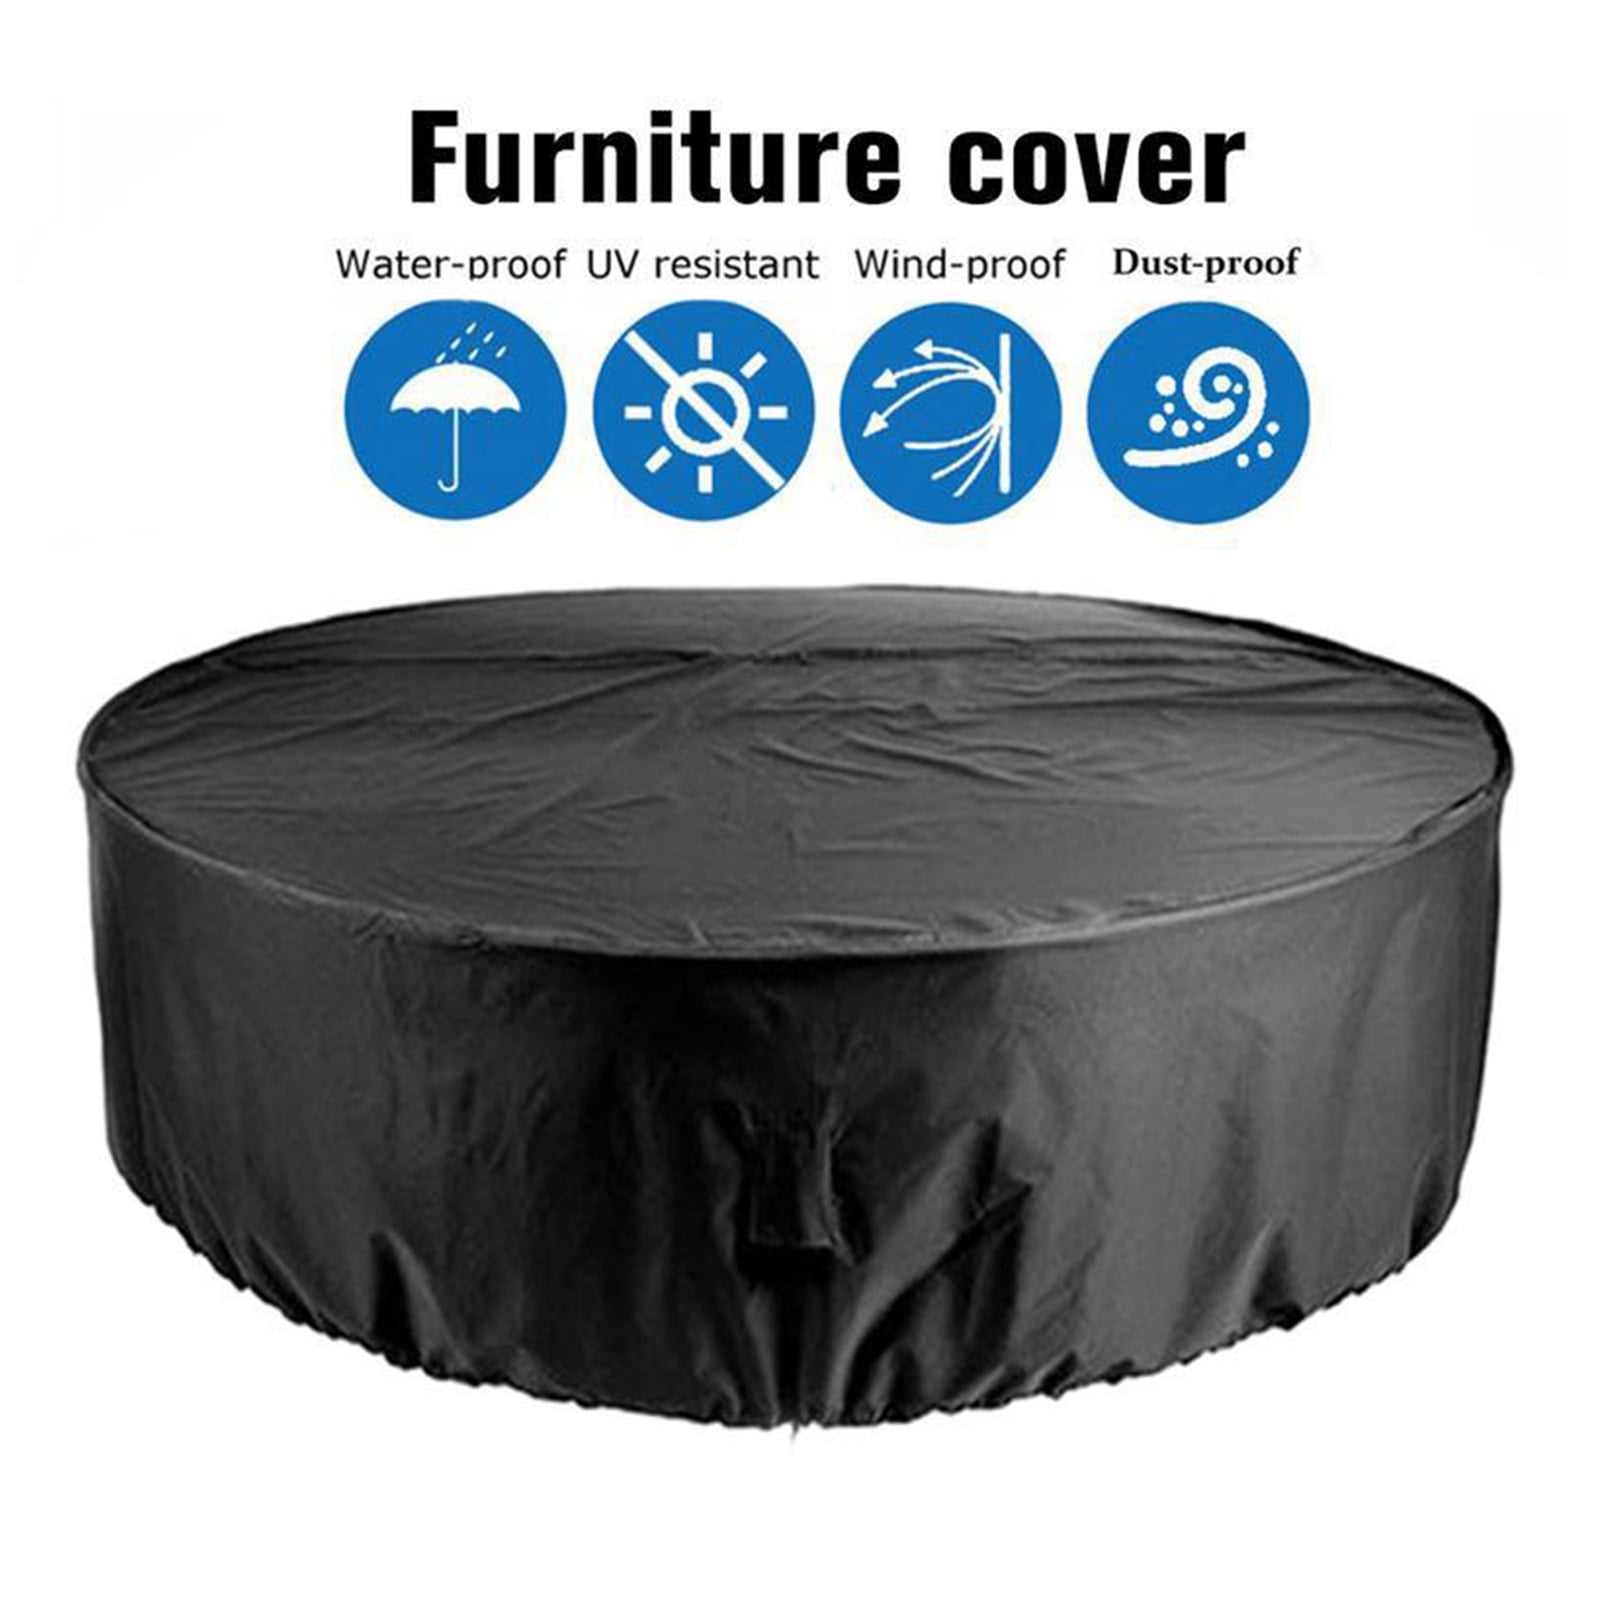 Round Cover Garden Patio Table Chair Outdoor Furniture Shelter Waterproof 6Size 